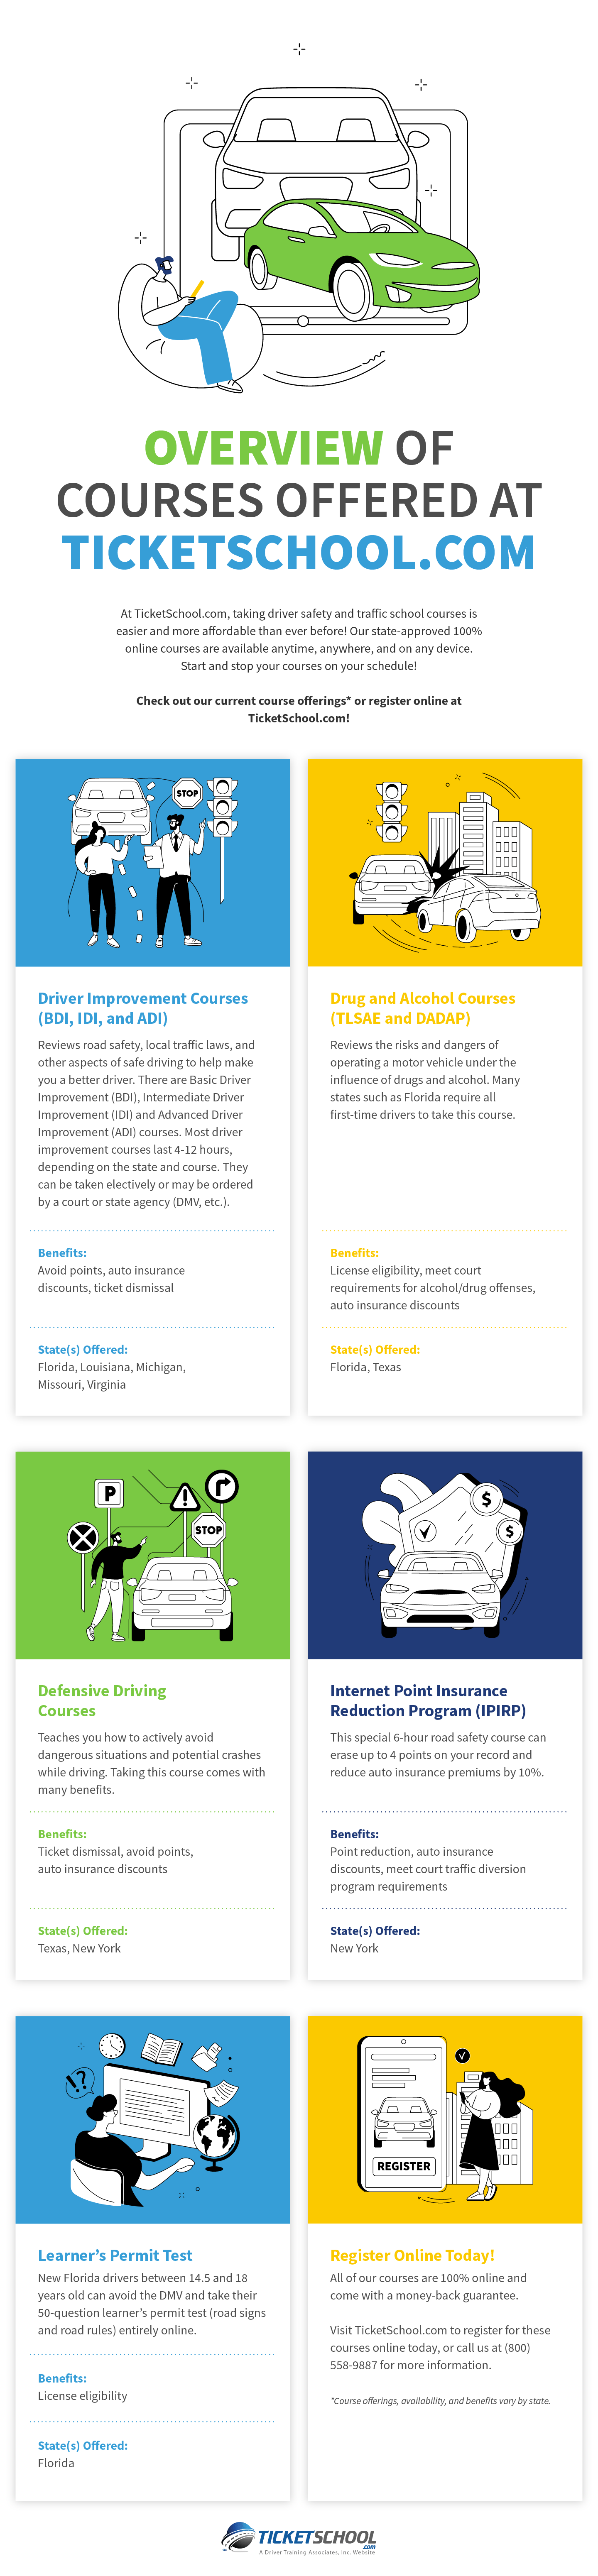 Overview of Courses Offered at TicketSchool.com Infographic